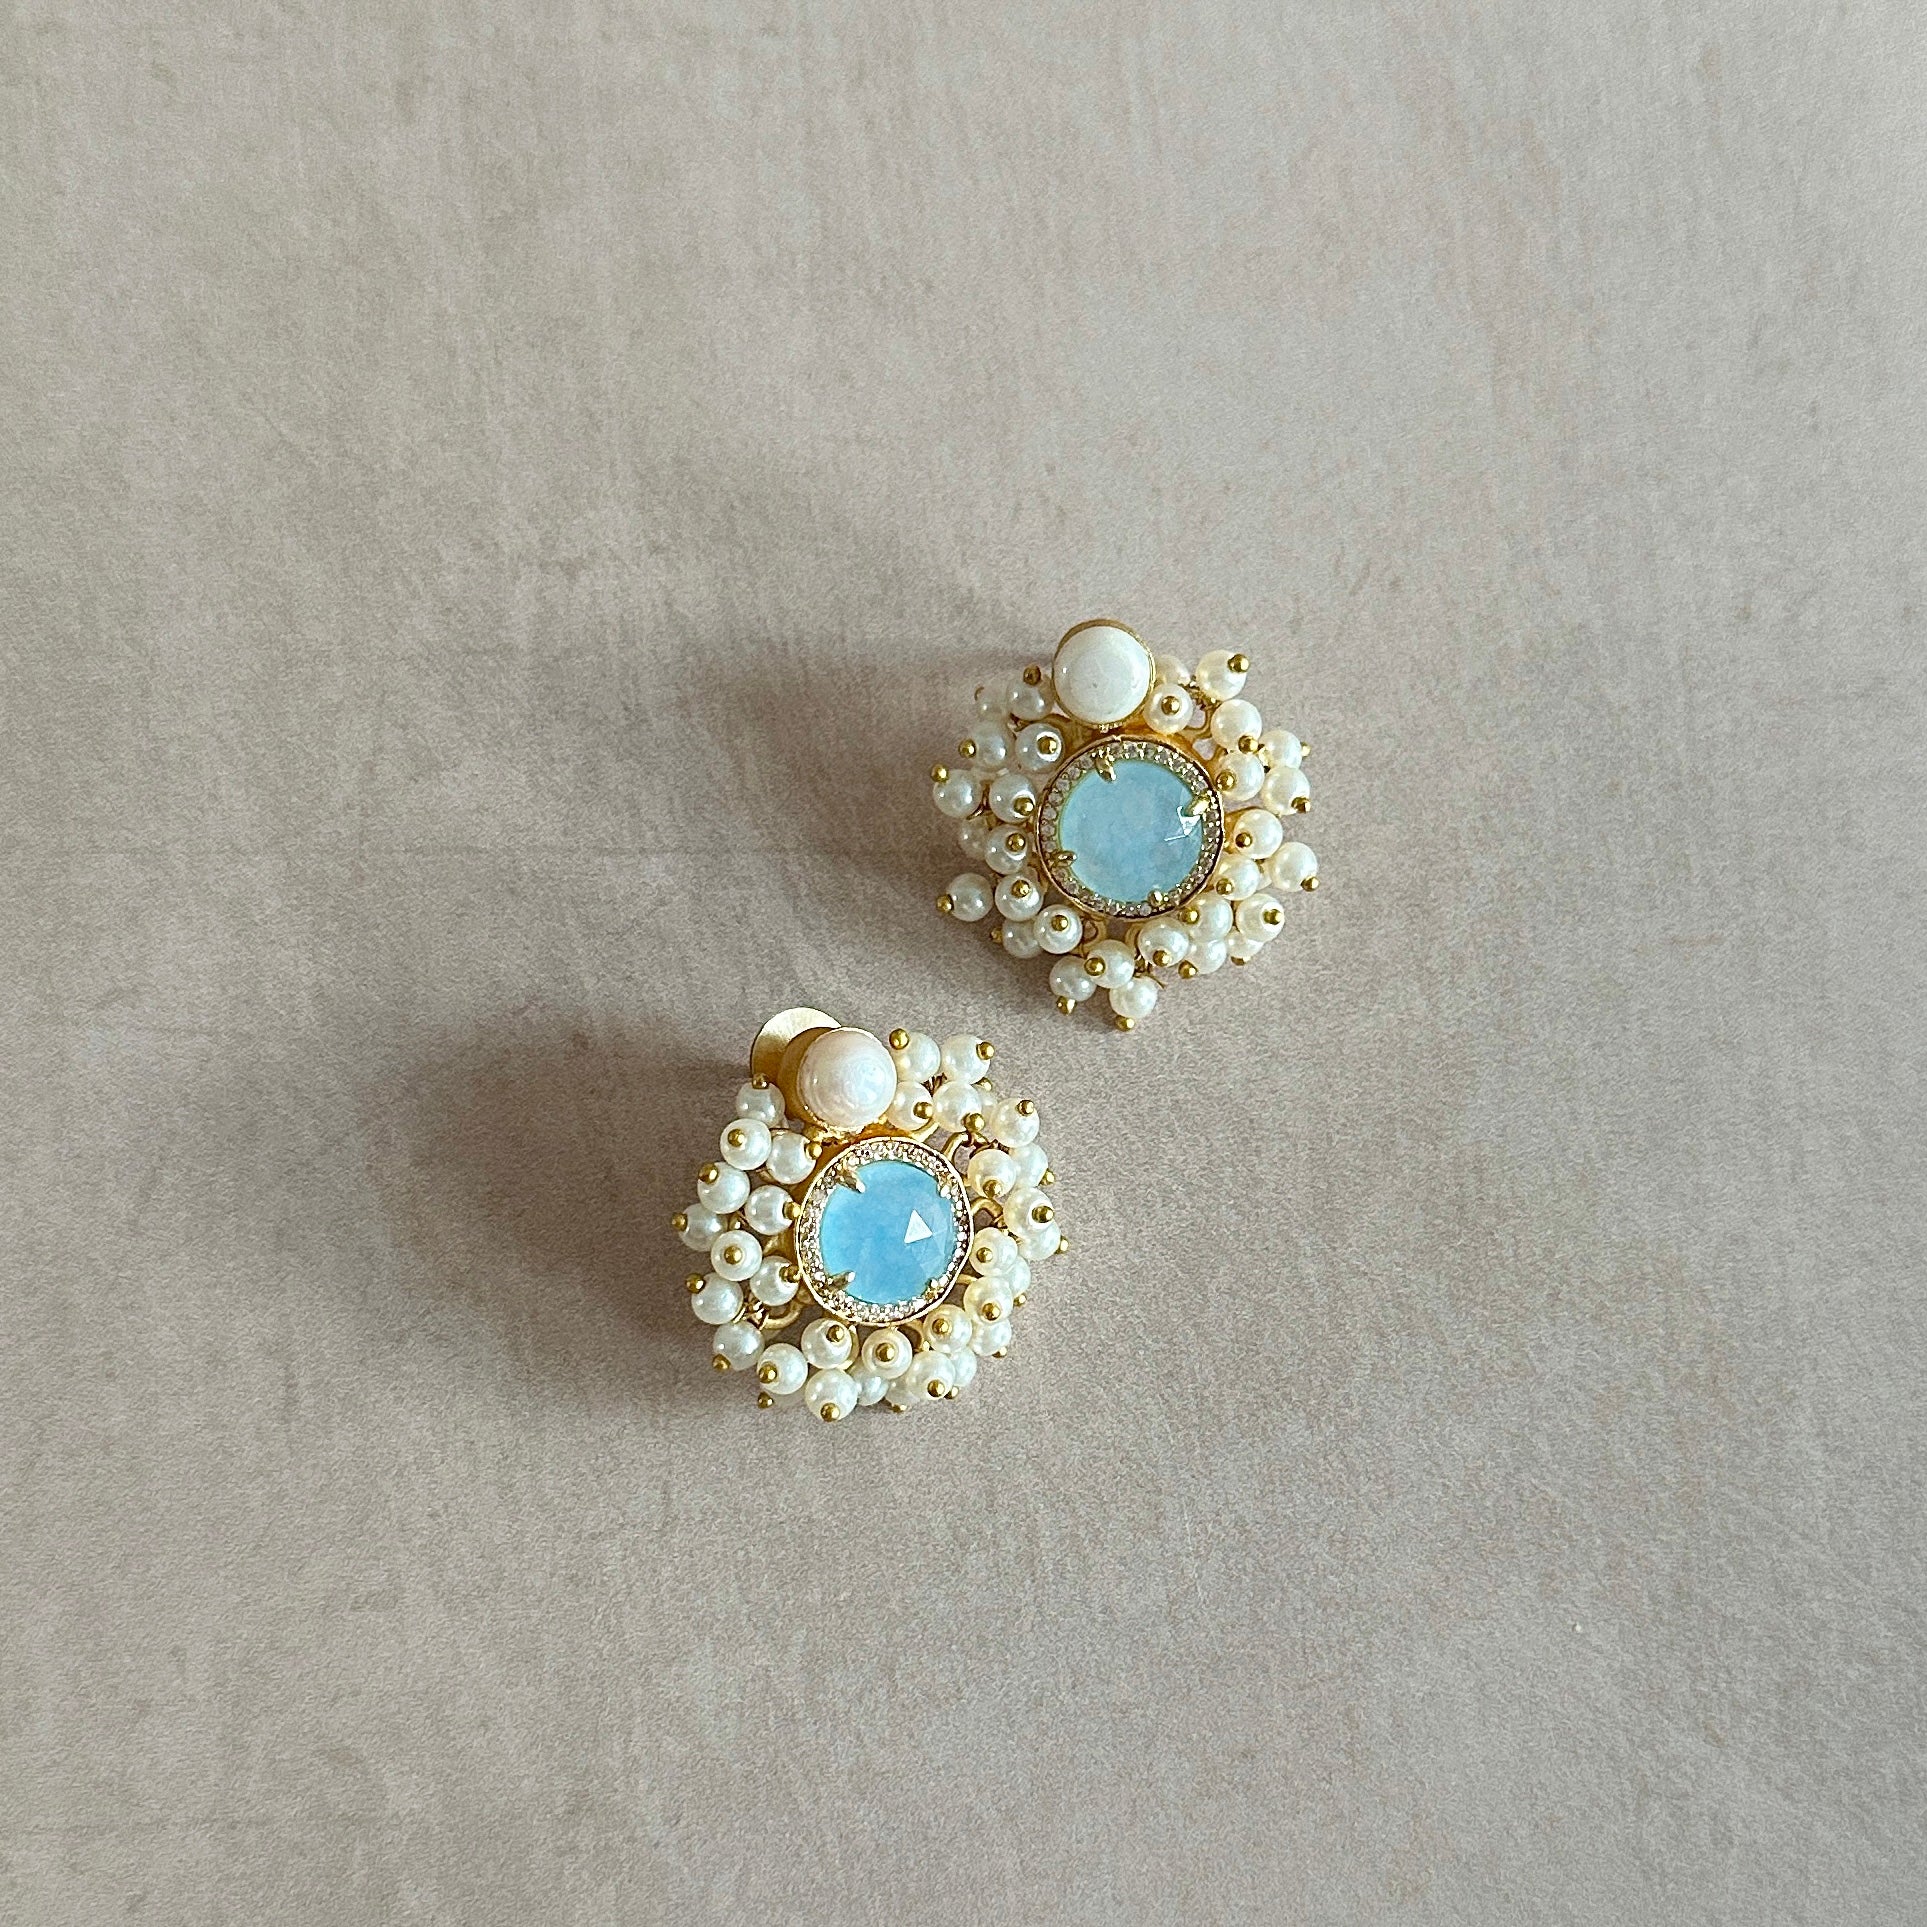 Introducing the elegant Amal Blue Stud Earrings! These classic stud earrings feature a delicate pearl accent and a stunning baby blue crystal, exuding timeless beauty and sophistication. Elevate any look with these must-have earrings.